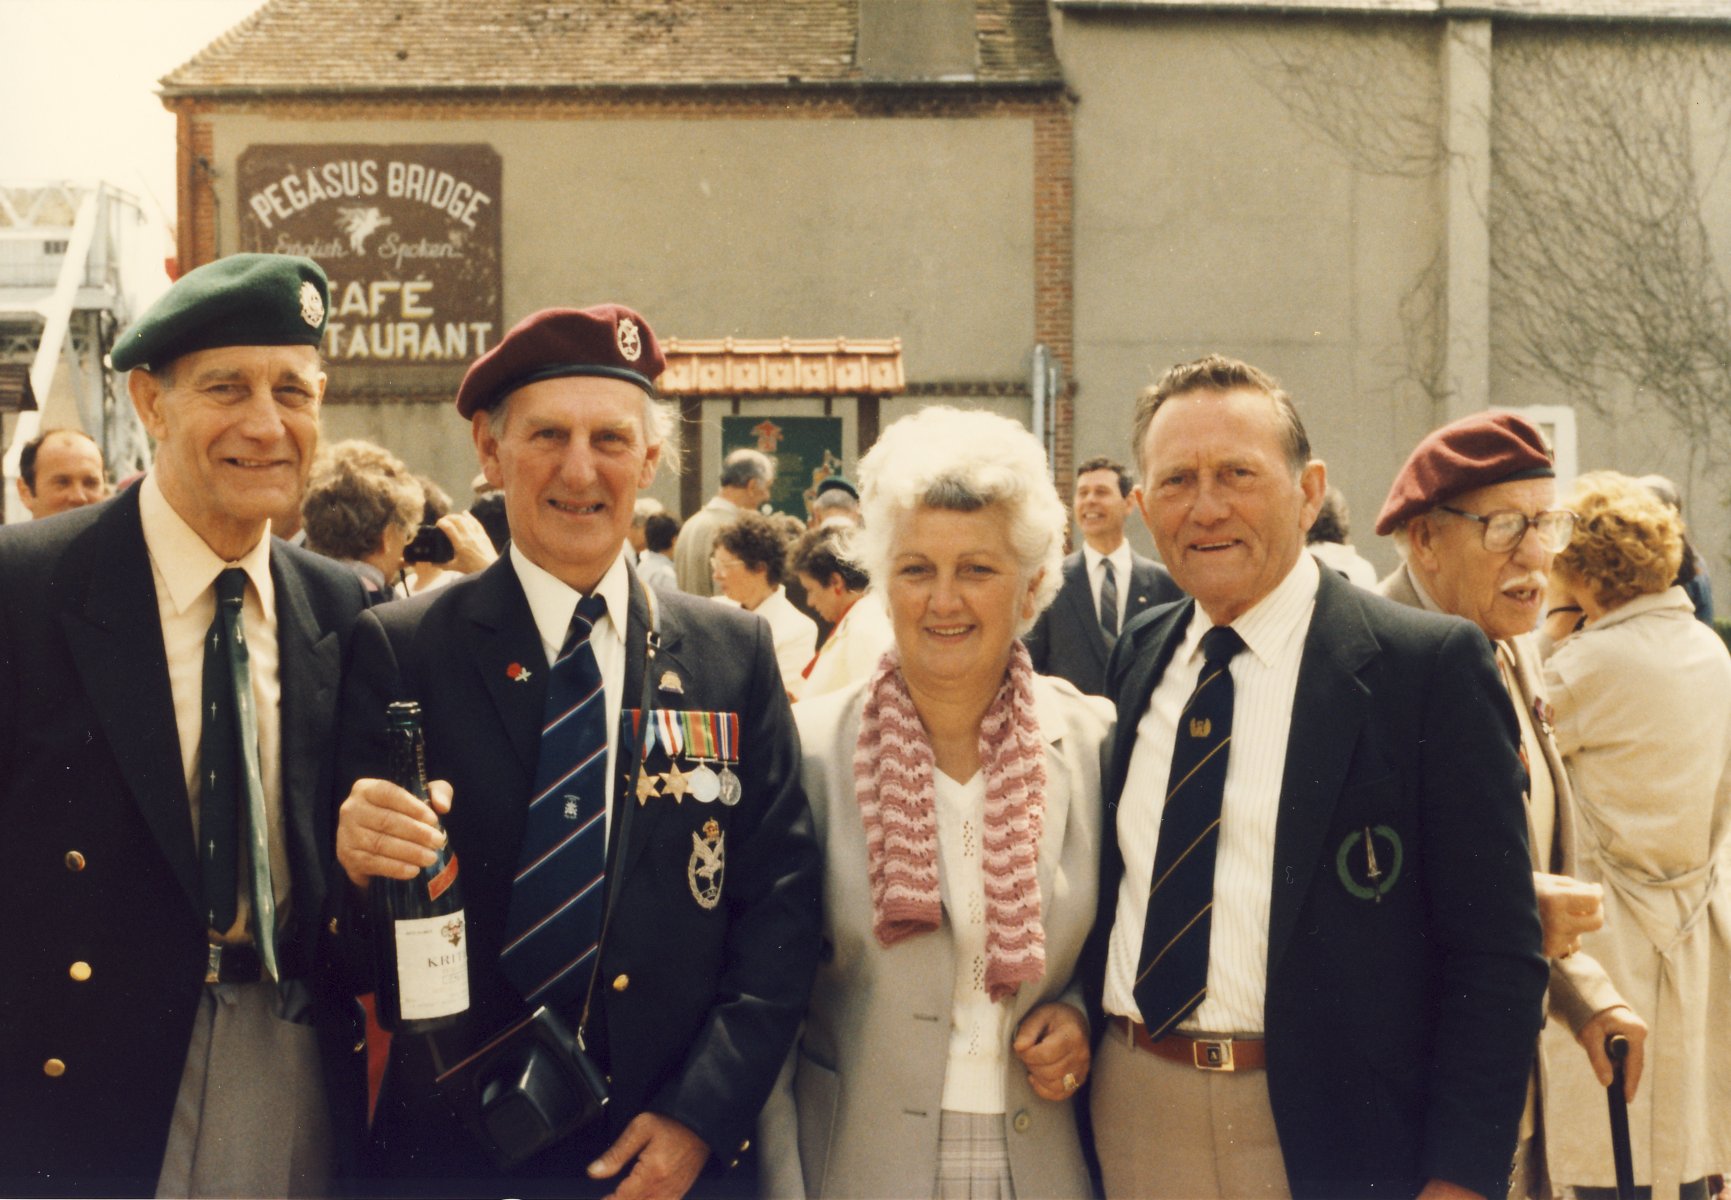 Arthur Chivers and others at Pegasus Bridge